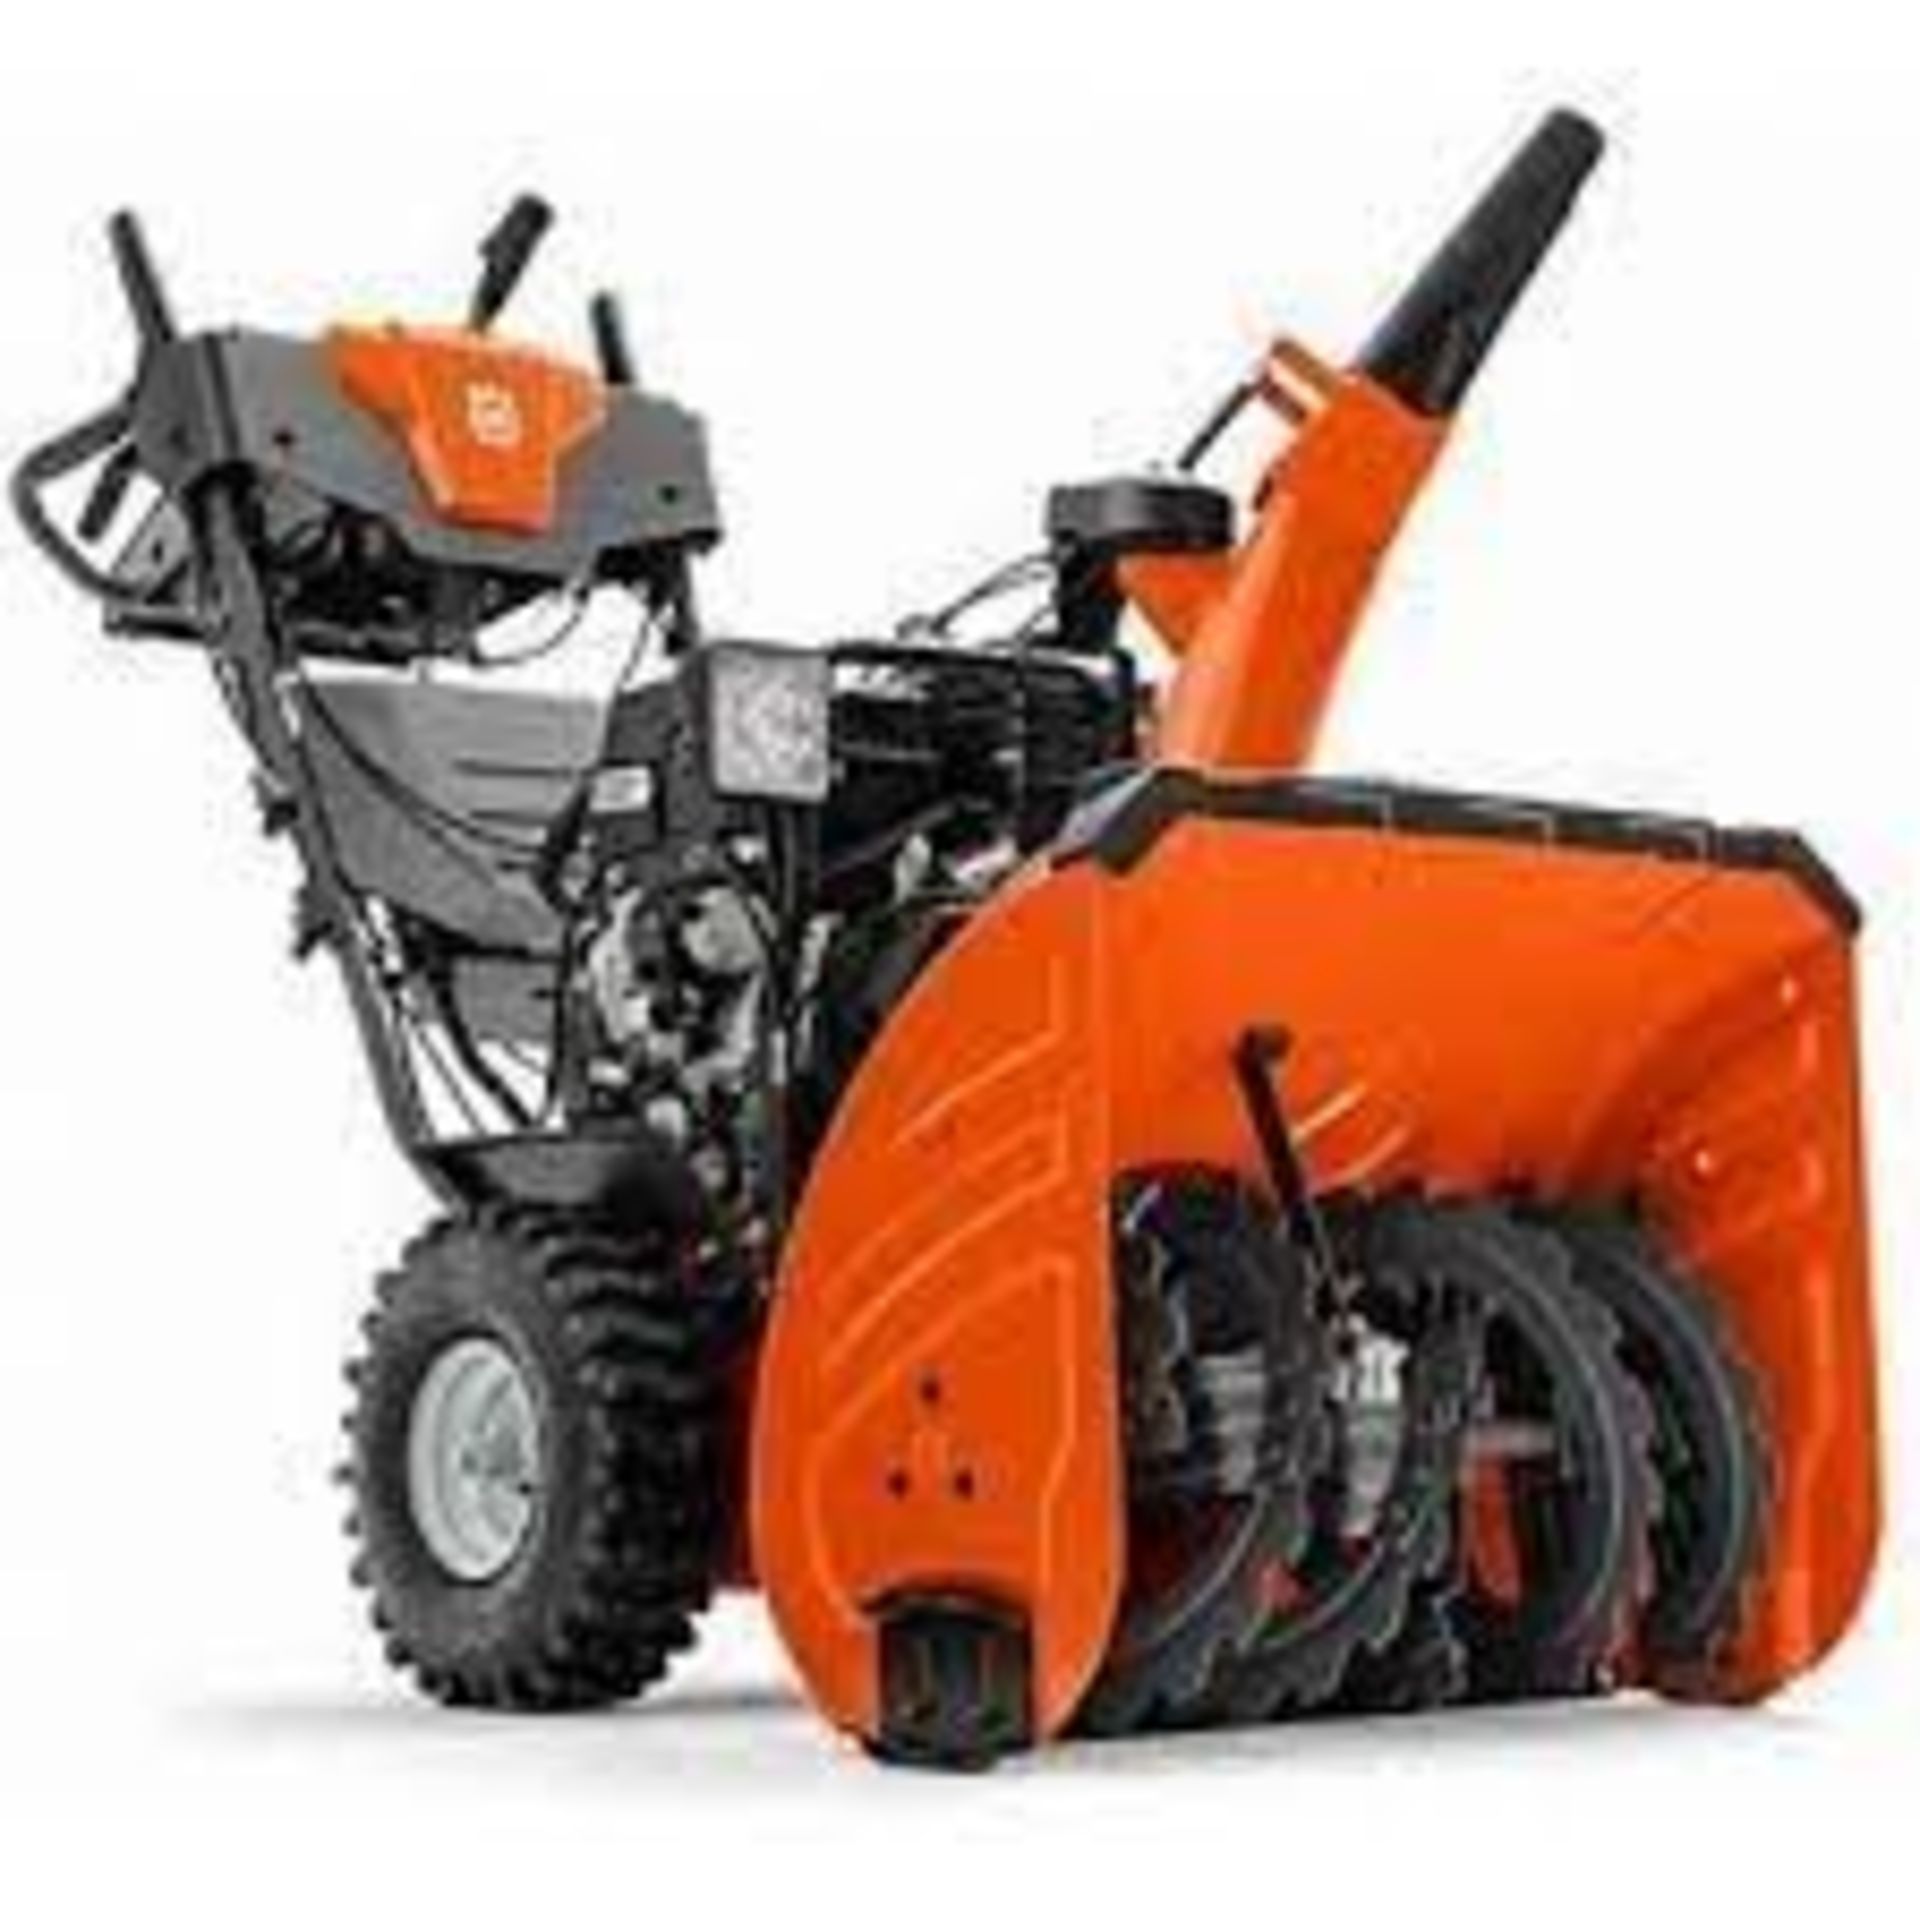 Husqvarna ST 327 Self Propelled Snow Blower - Approx MSRP $1399 - Image 2 of 4